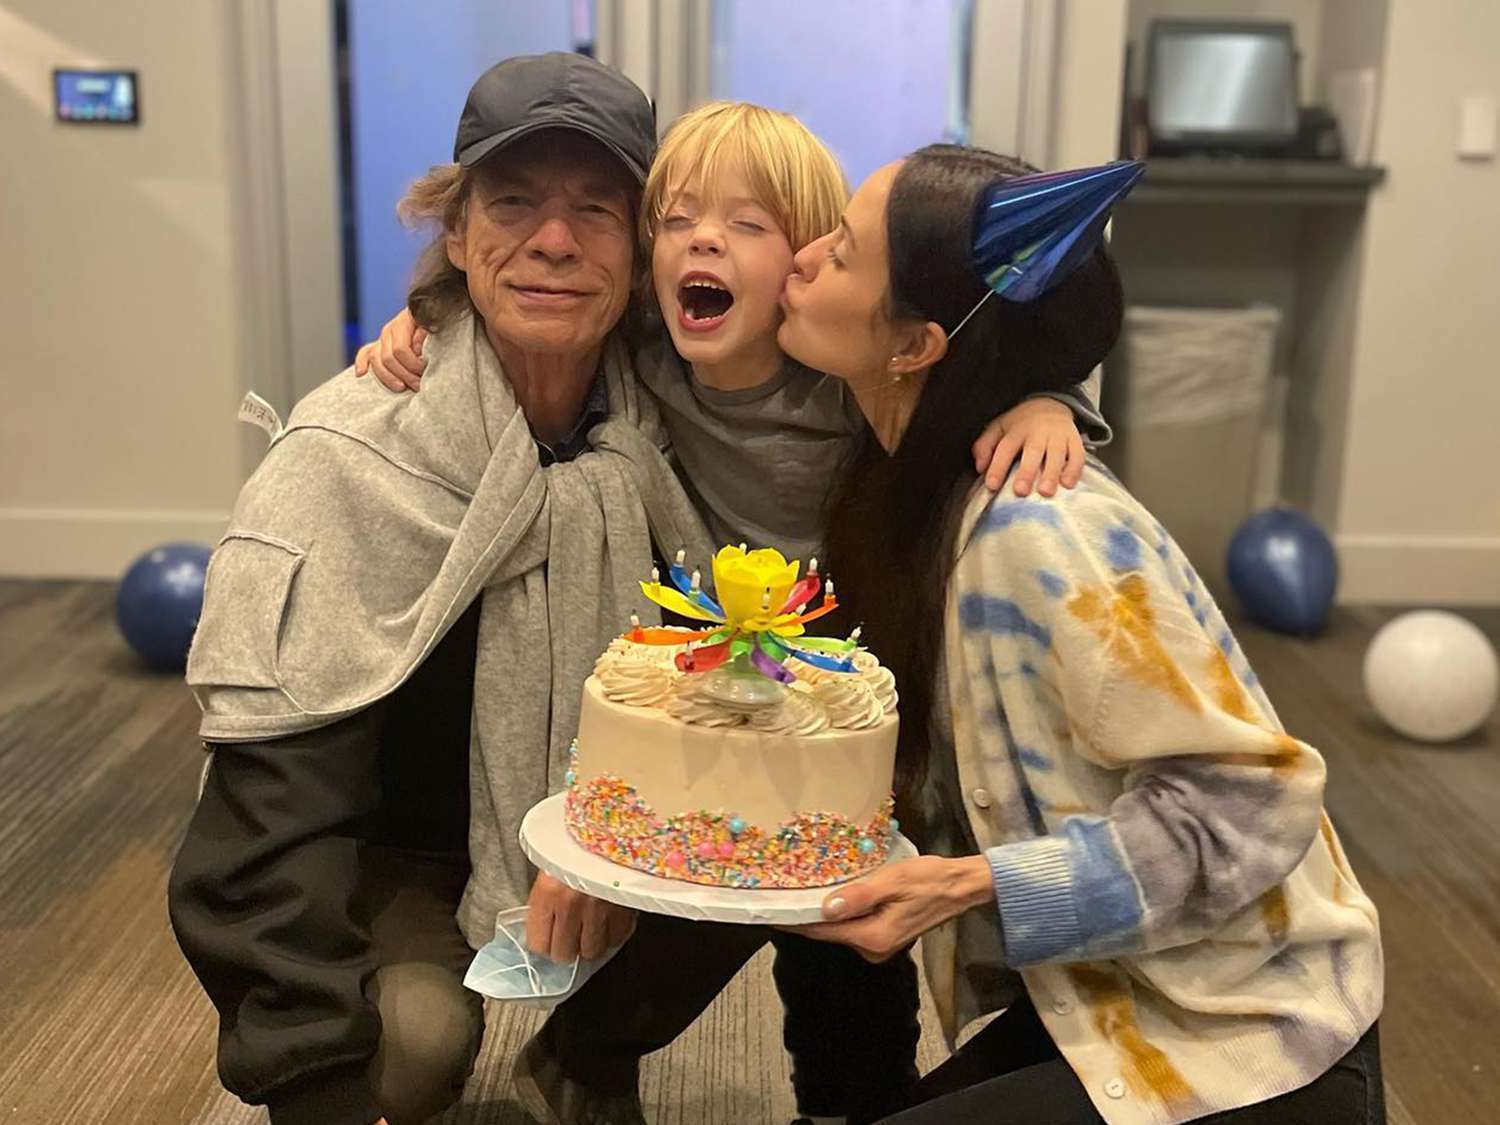 She gave birth to his eighth child: Mick Jagger gets engaged to 36-year-old ballerina at 80